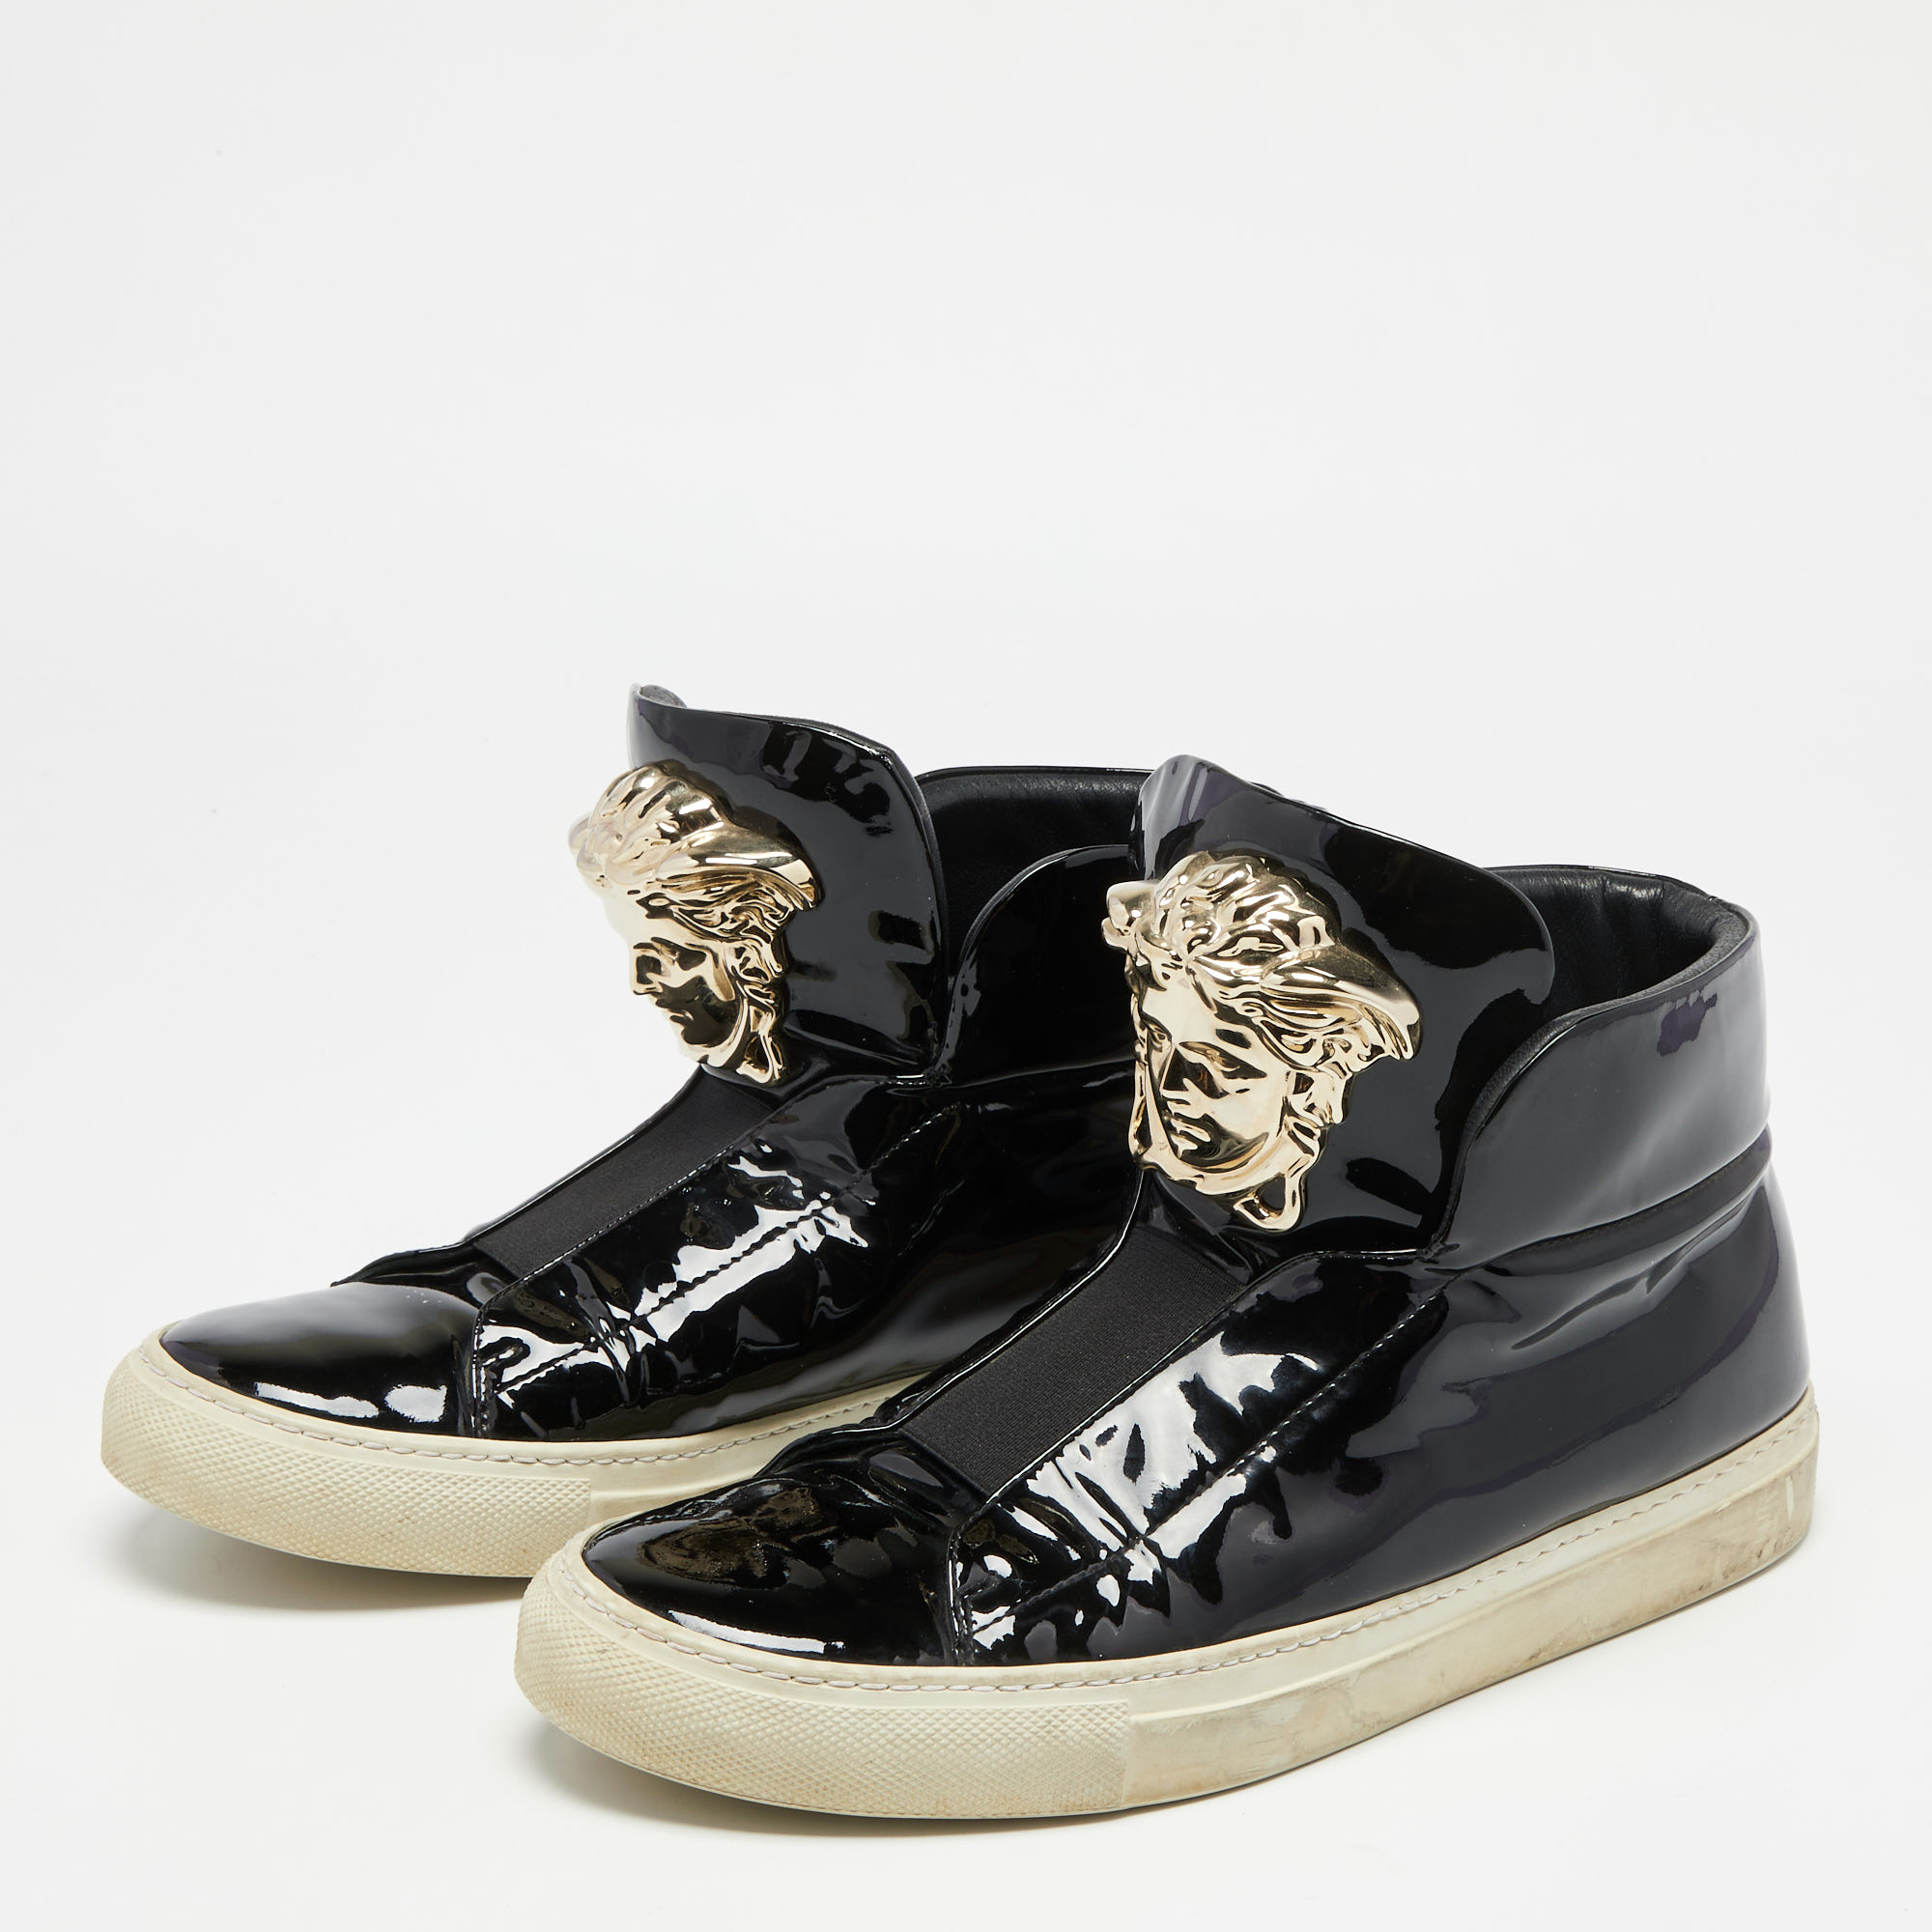 

Versace Black Patent Leather Palazzo Medusa High Top Sneakers Size